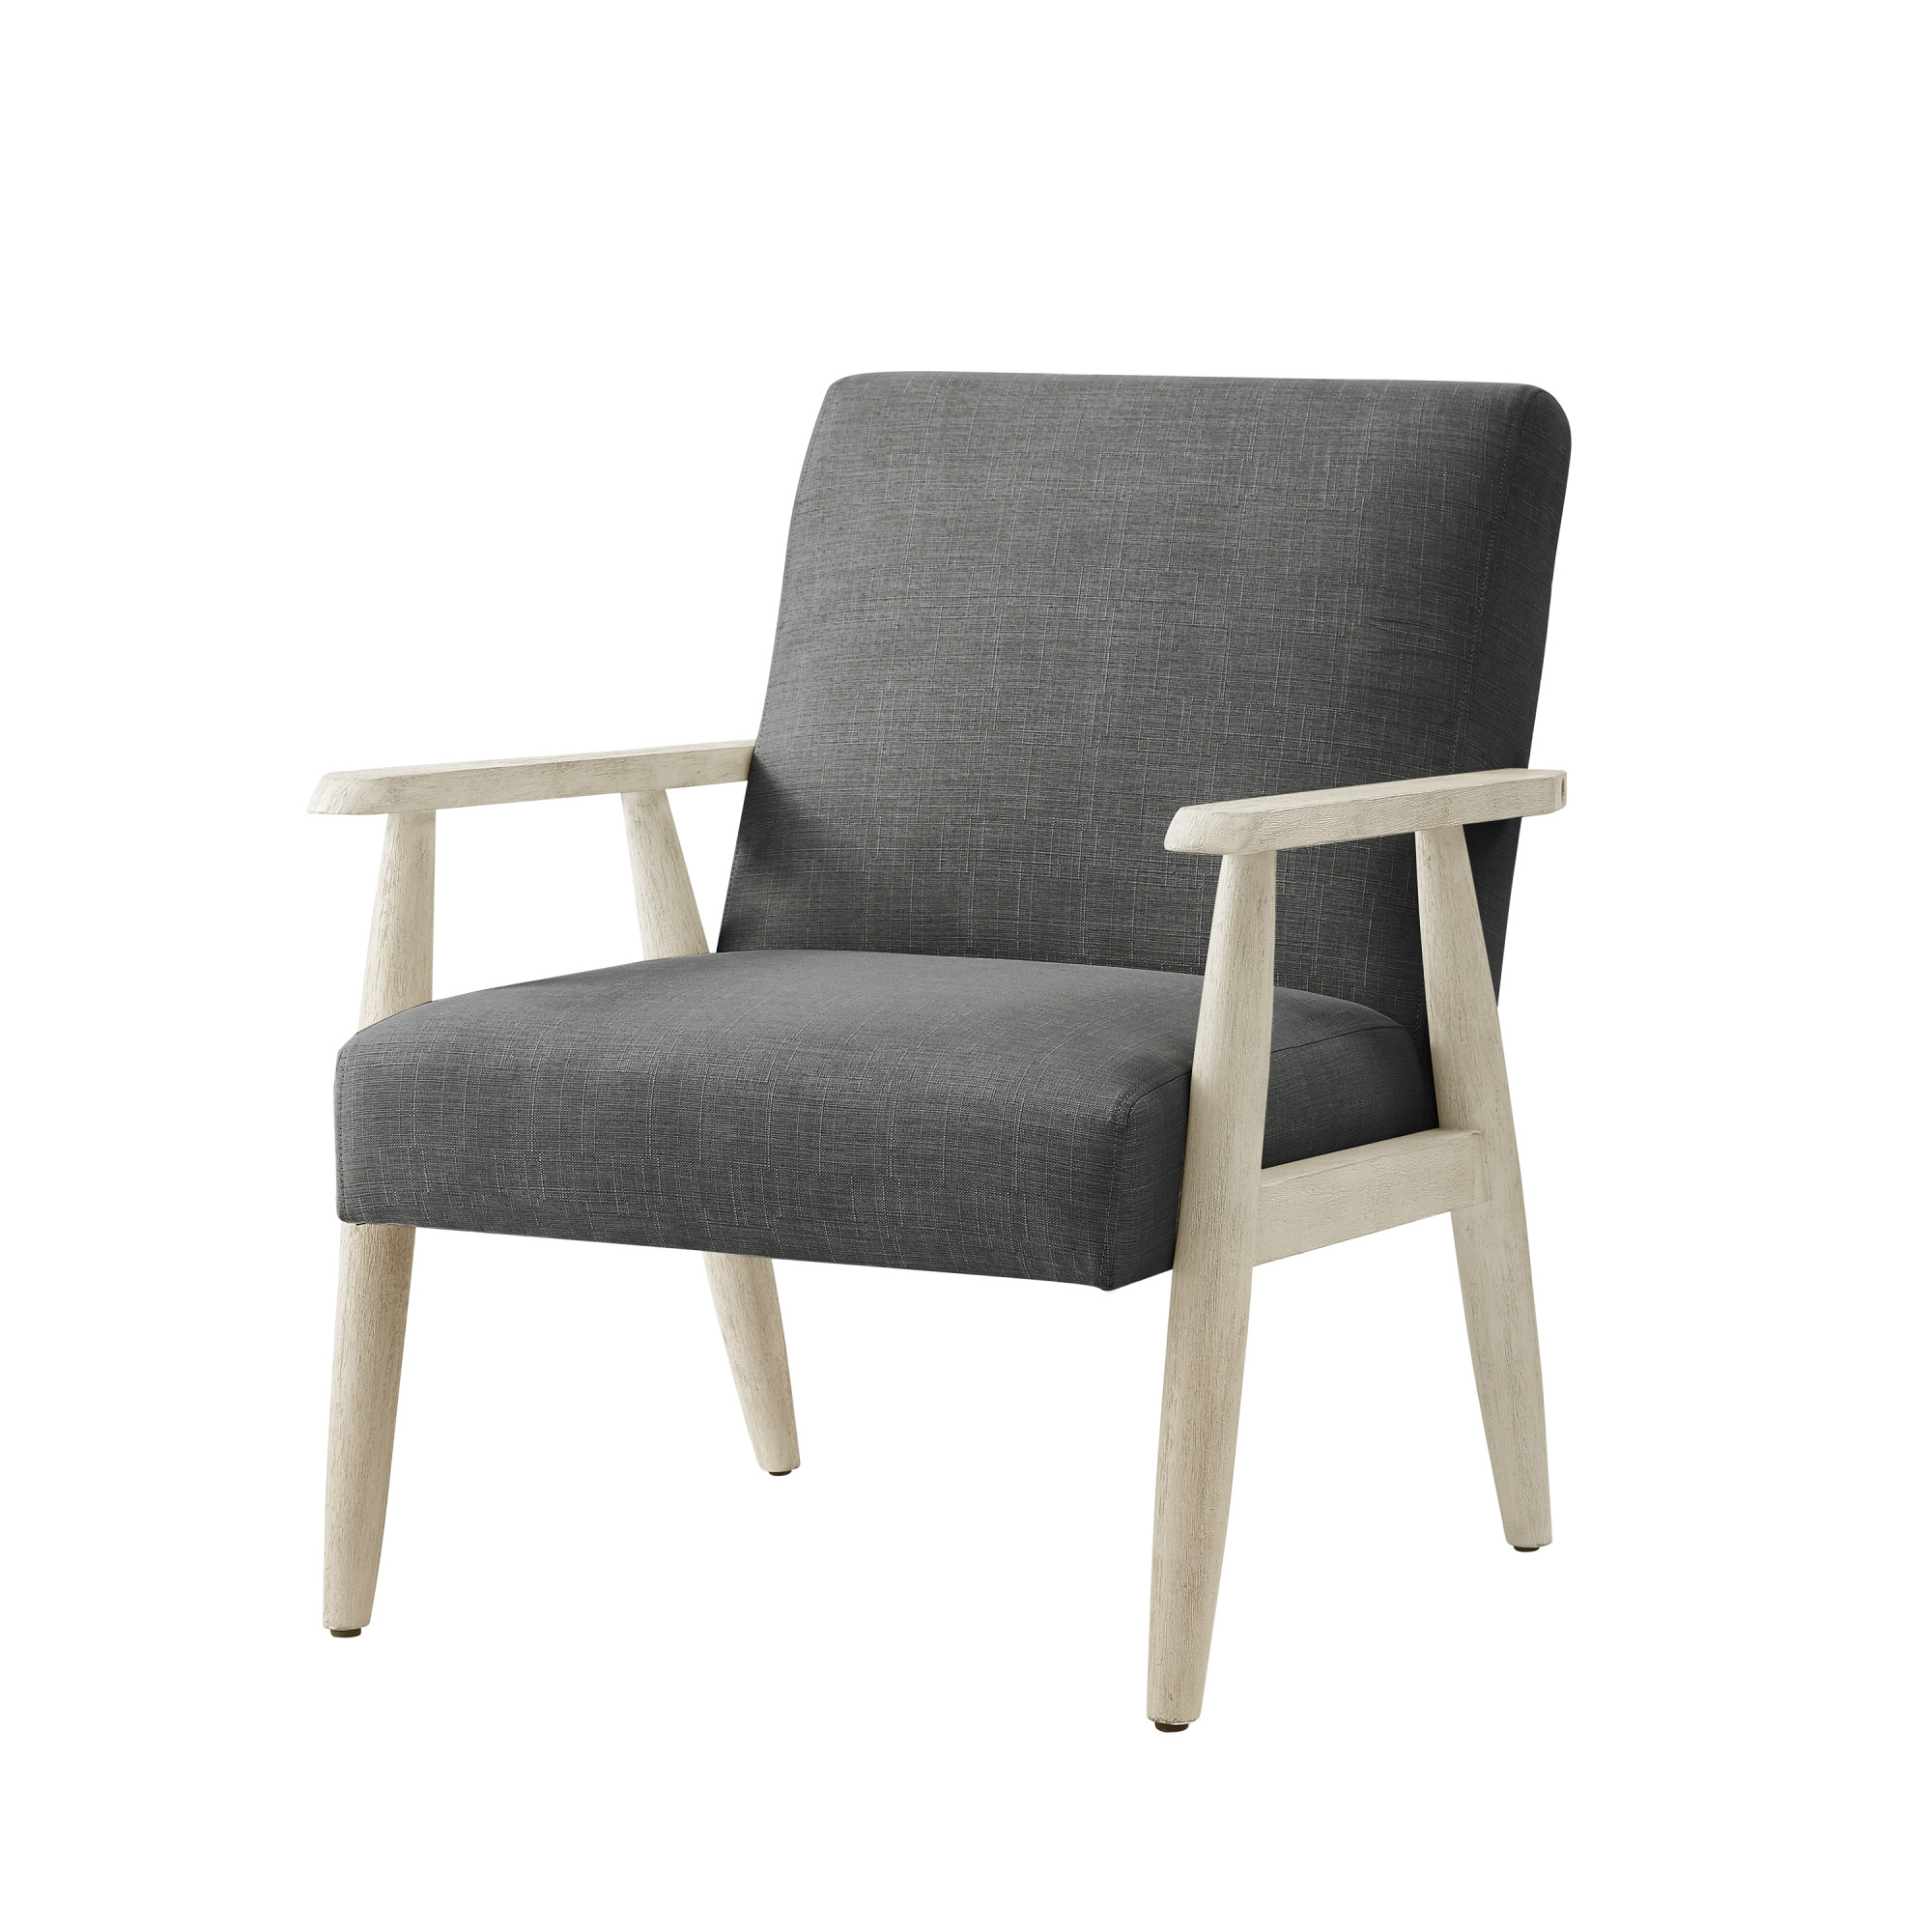 30" Charcoal And Cream Linen Arm Chair-533960-1